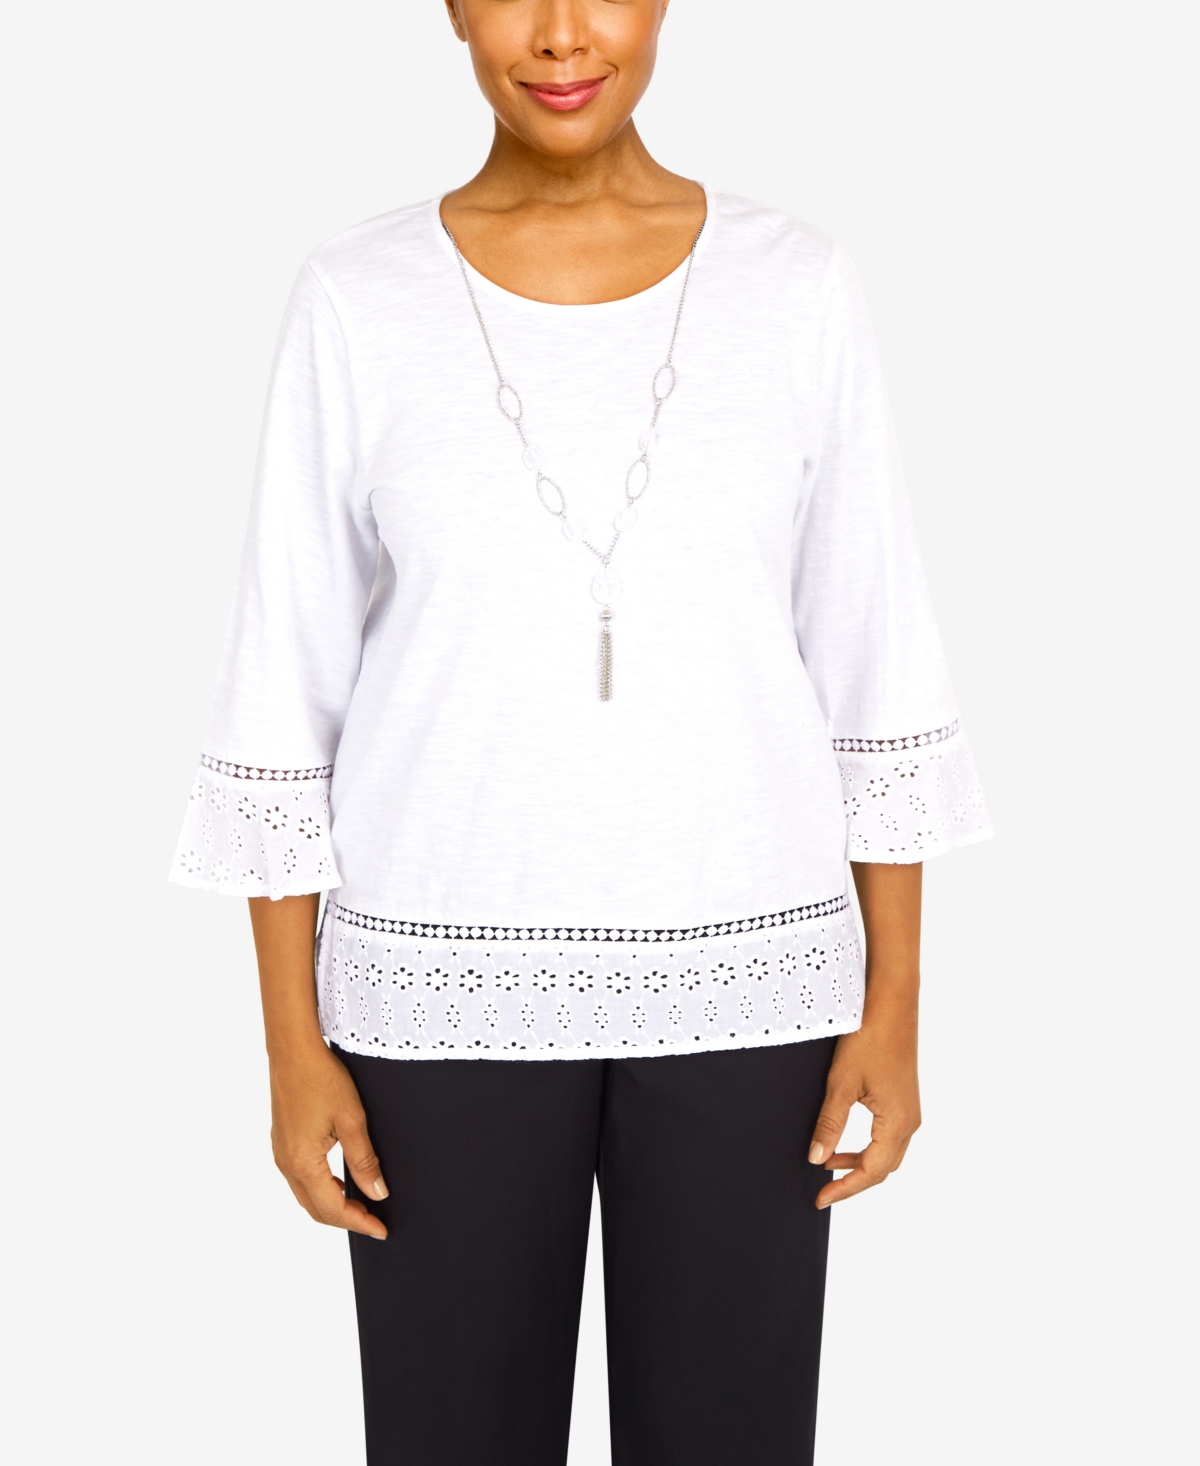 ALFRED DUNNER WOMEN'S SUMMER IN THE CITY EYELET BORDER CREW NECK TOP WITH NECKLACE